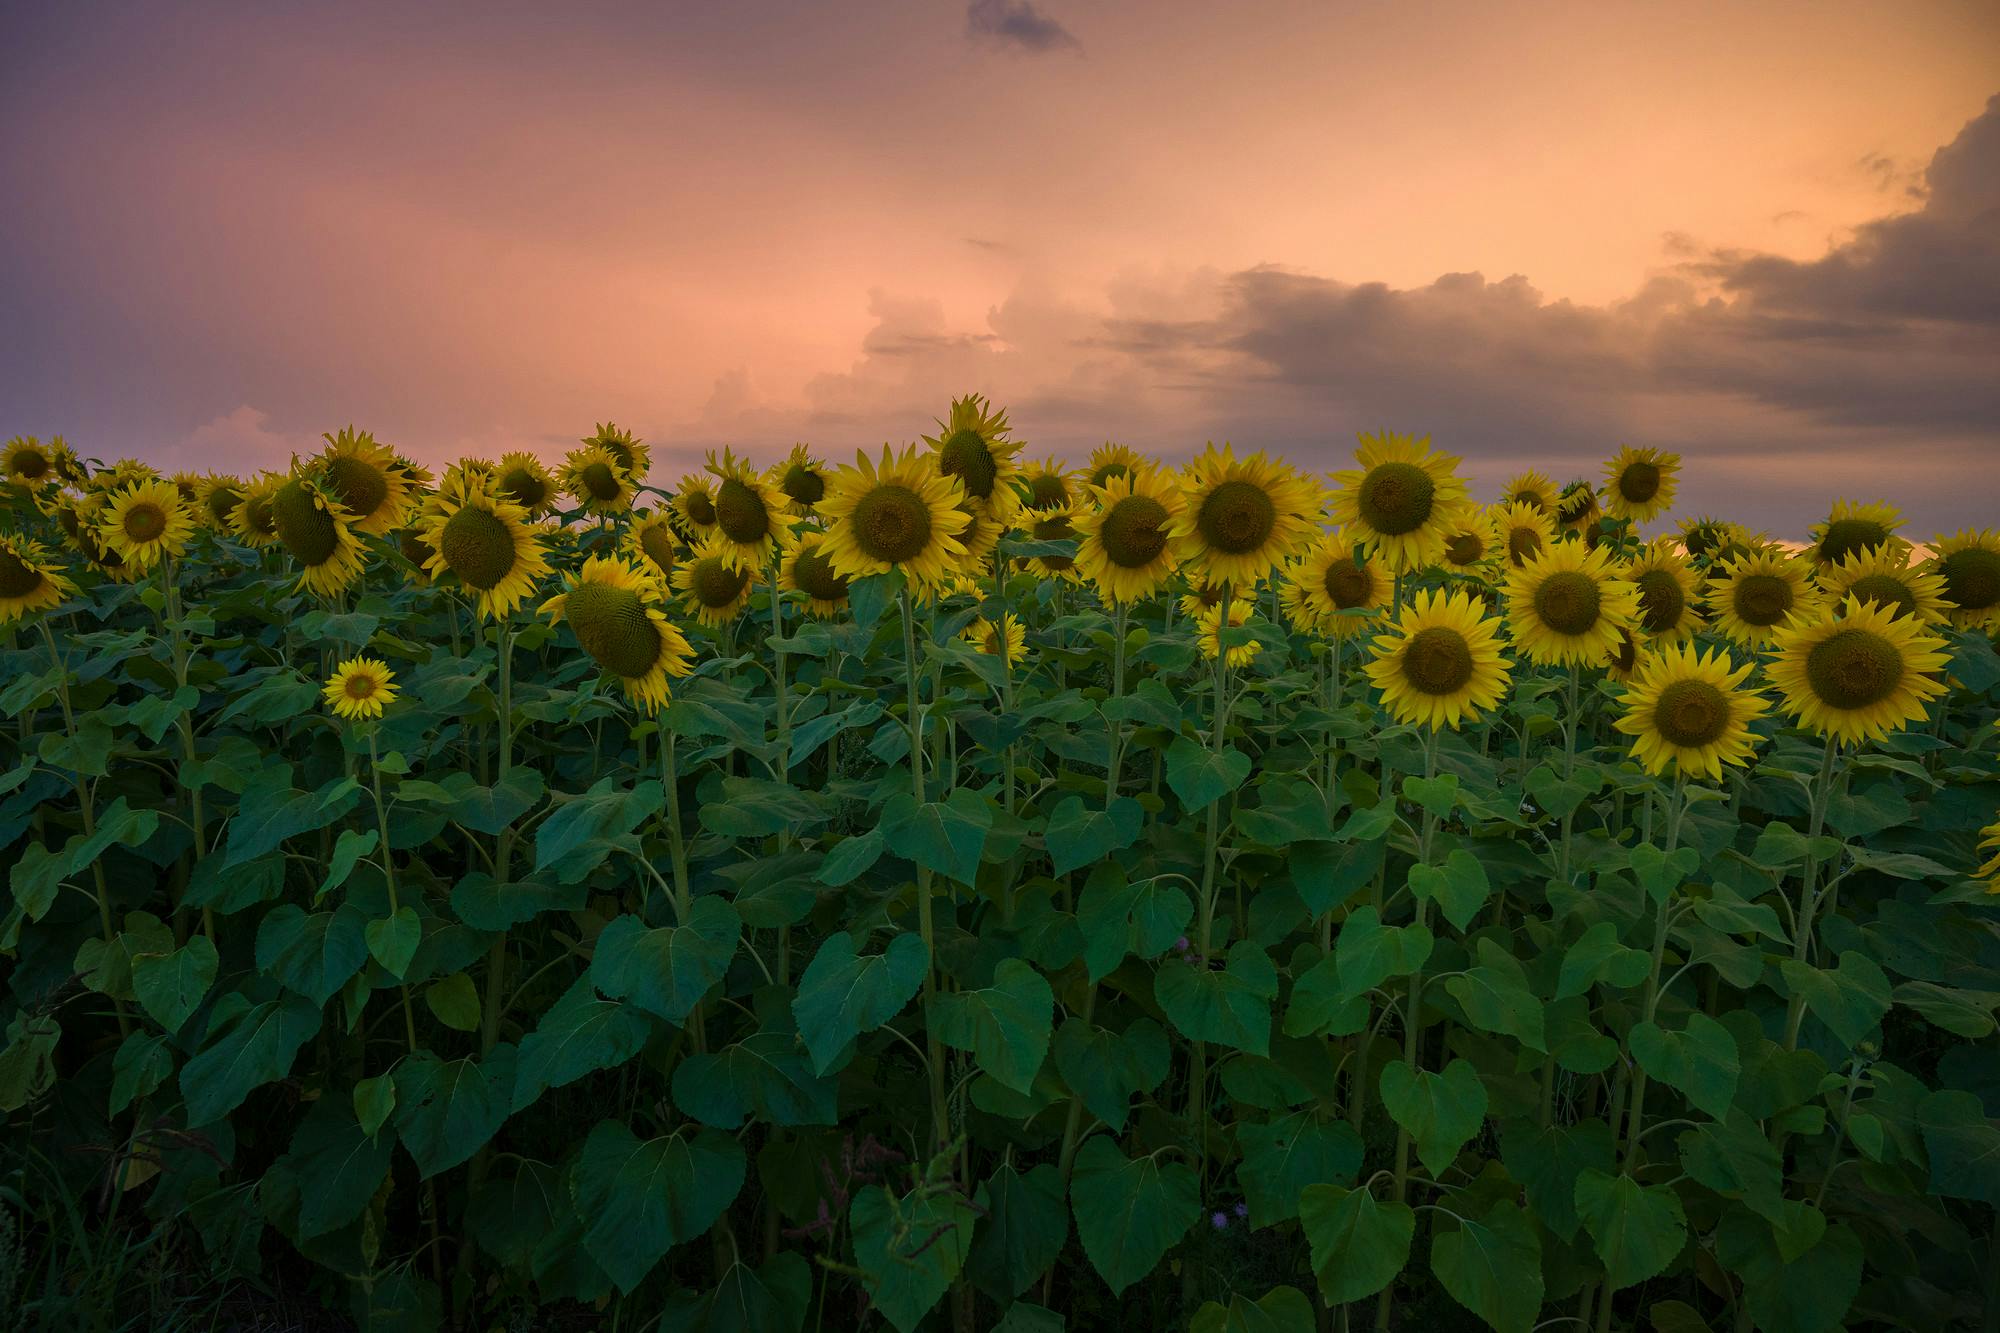 Sunflowers and Thunderstorm Clouds